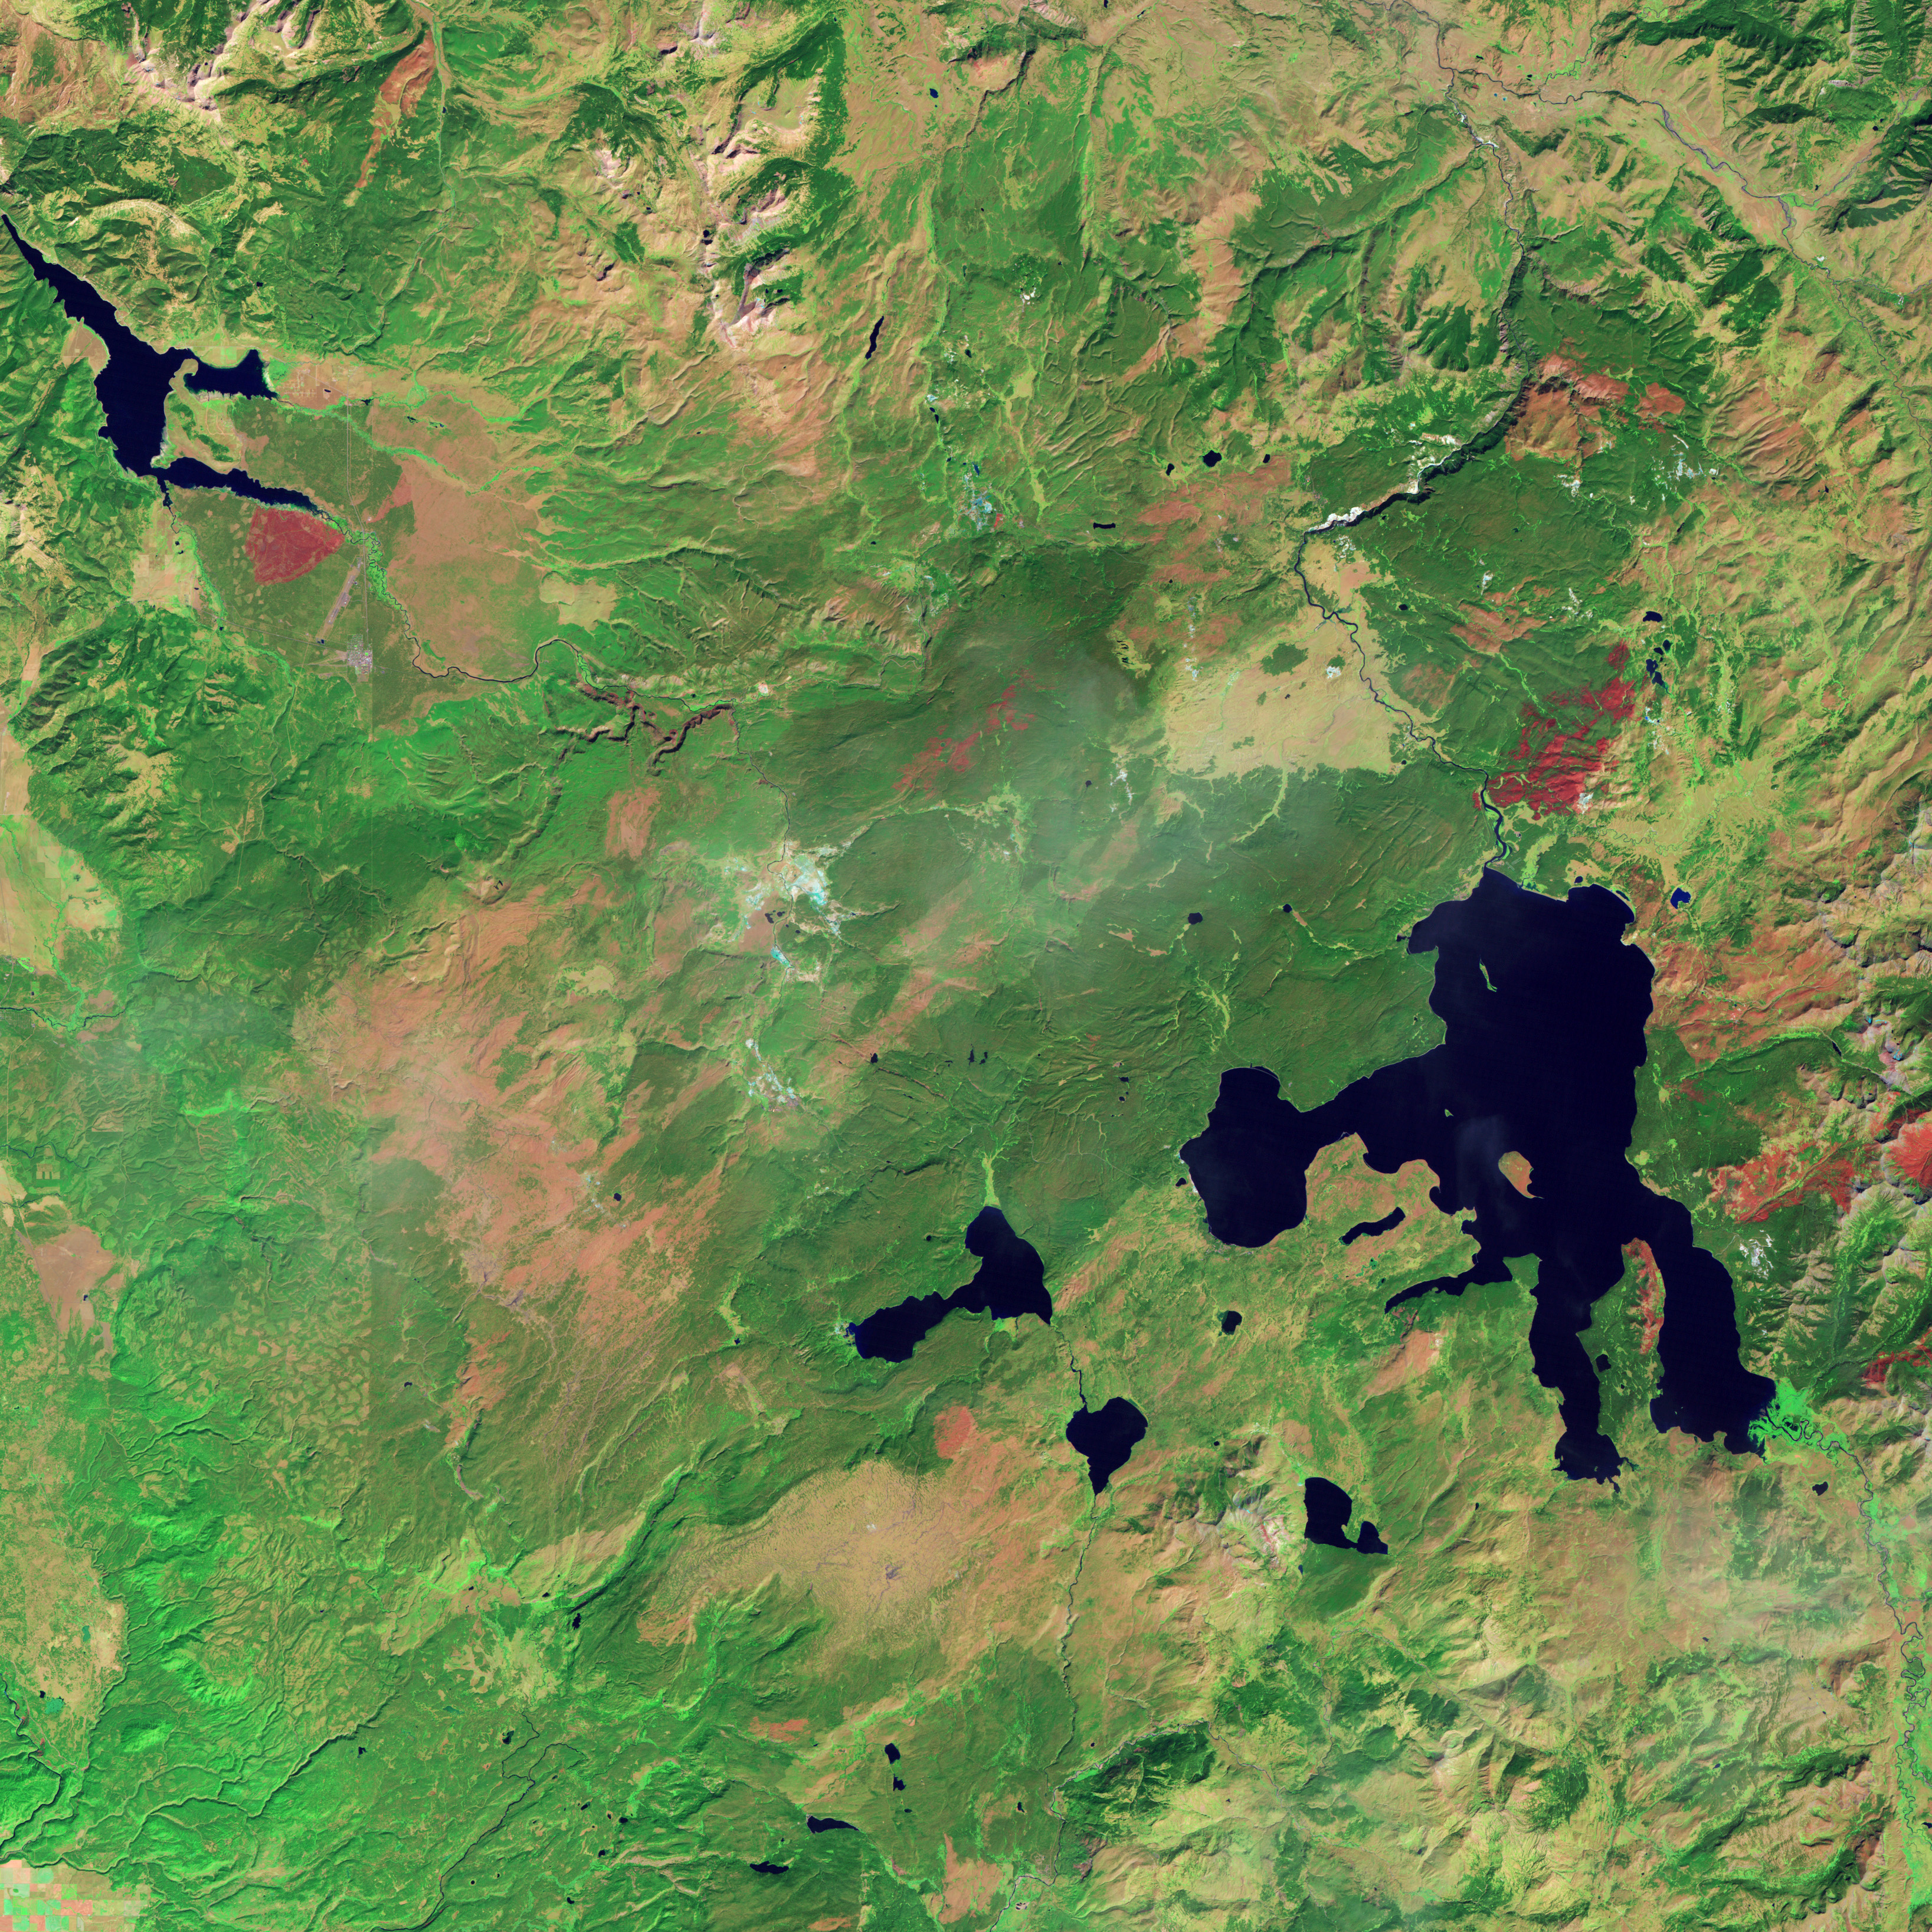 Yellowstone Recovers from 1988 Fires - related image preview